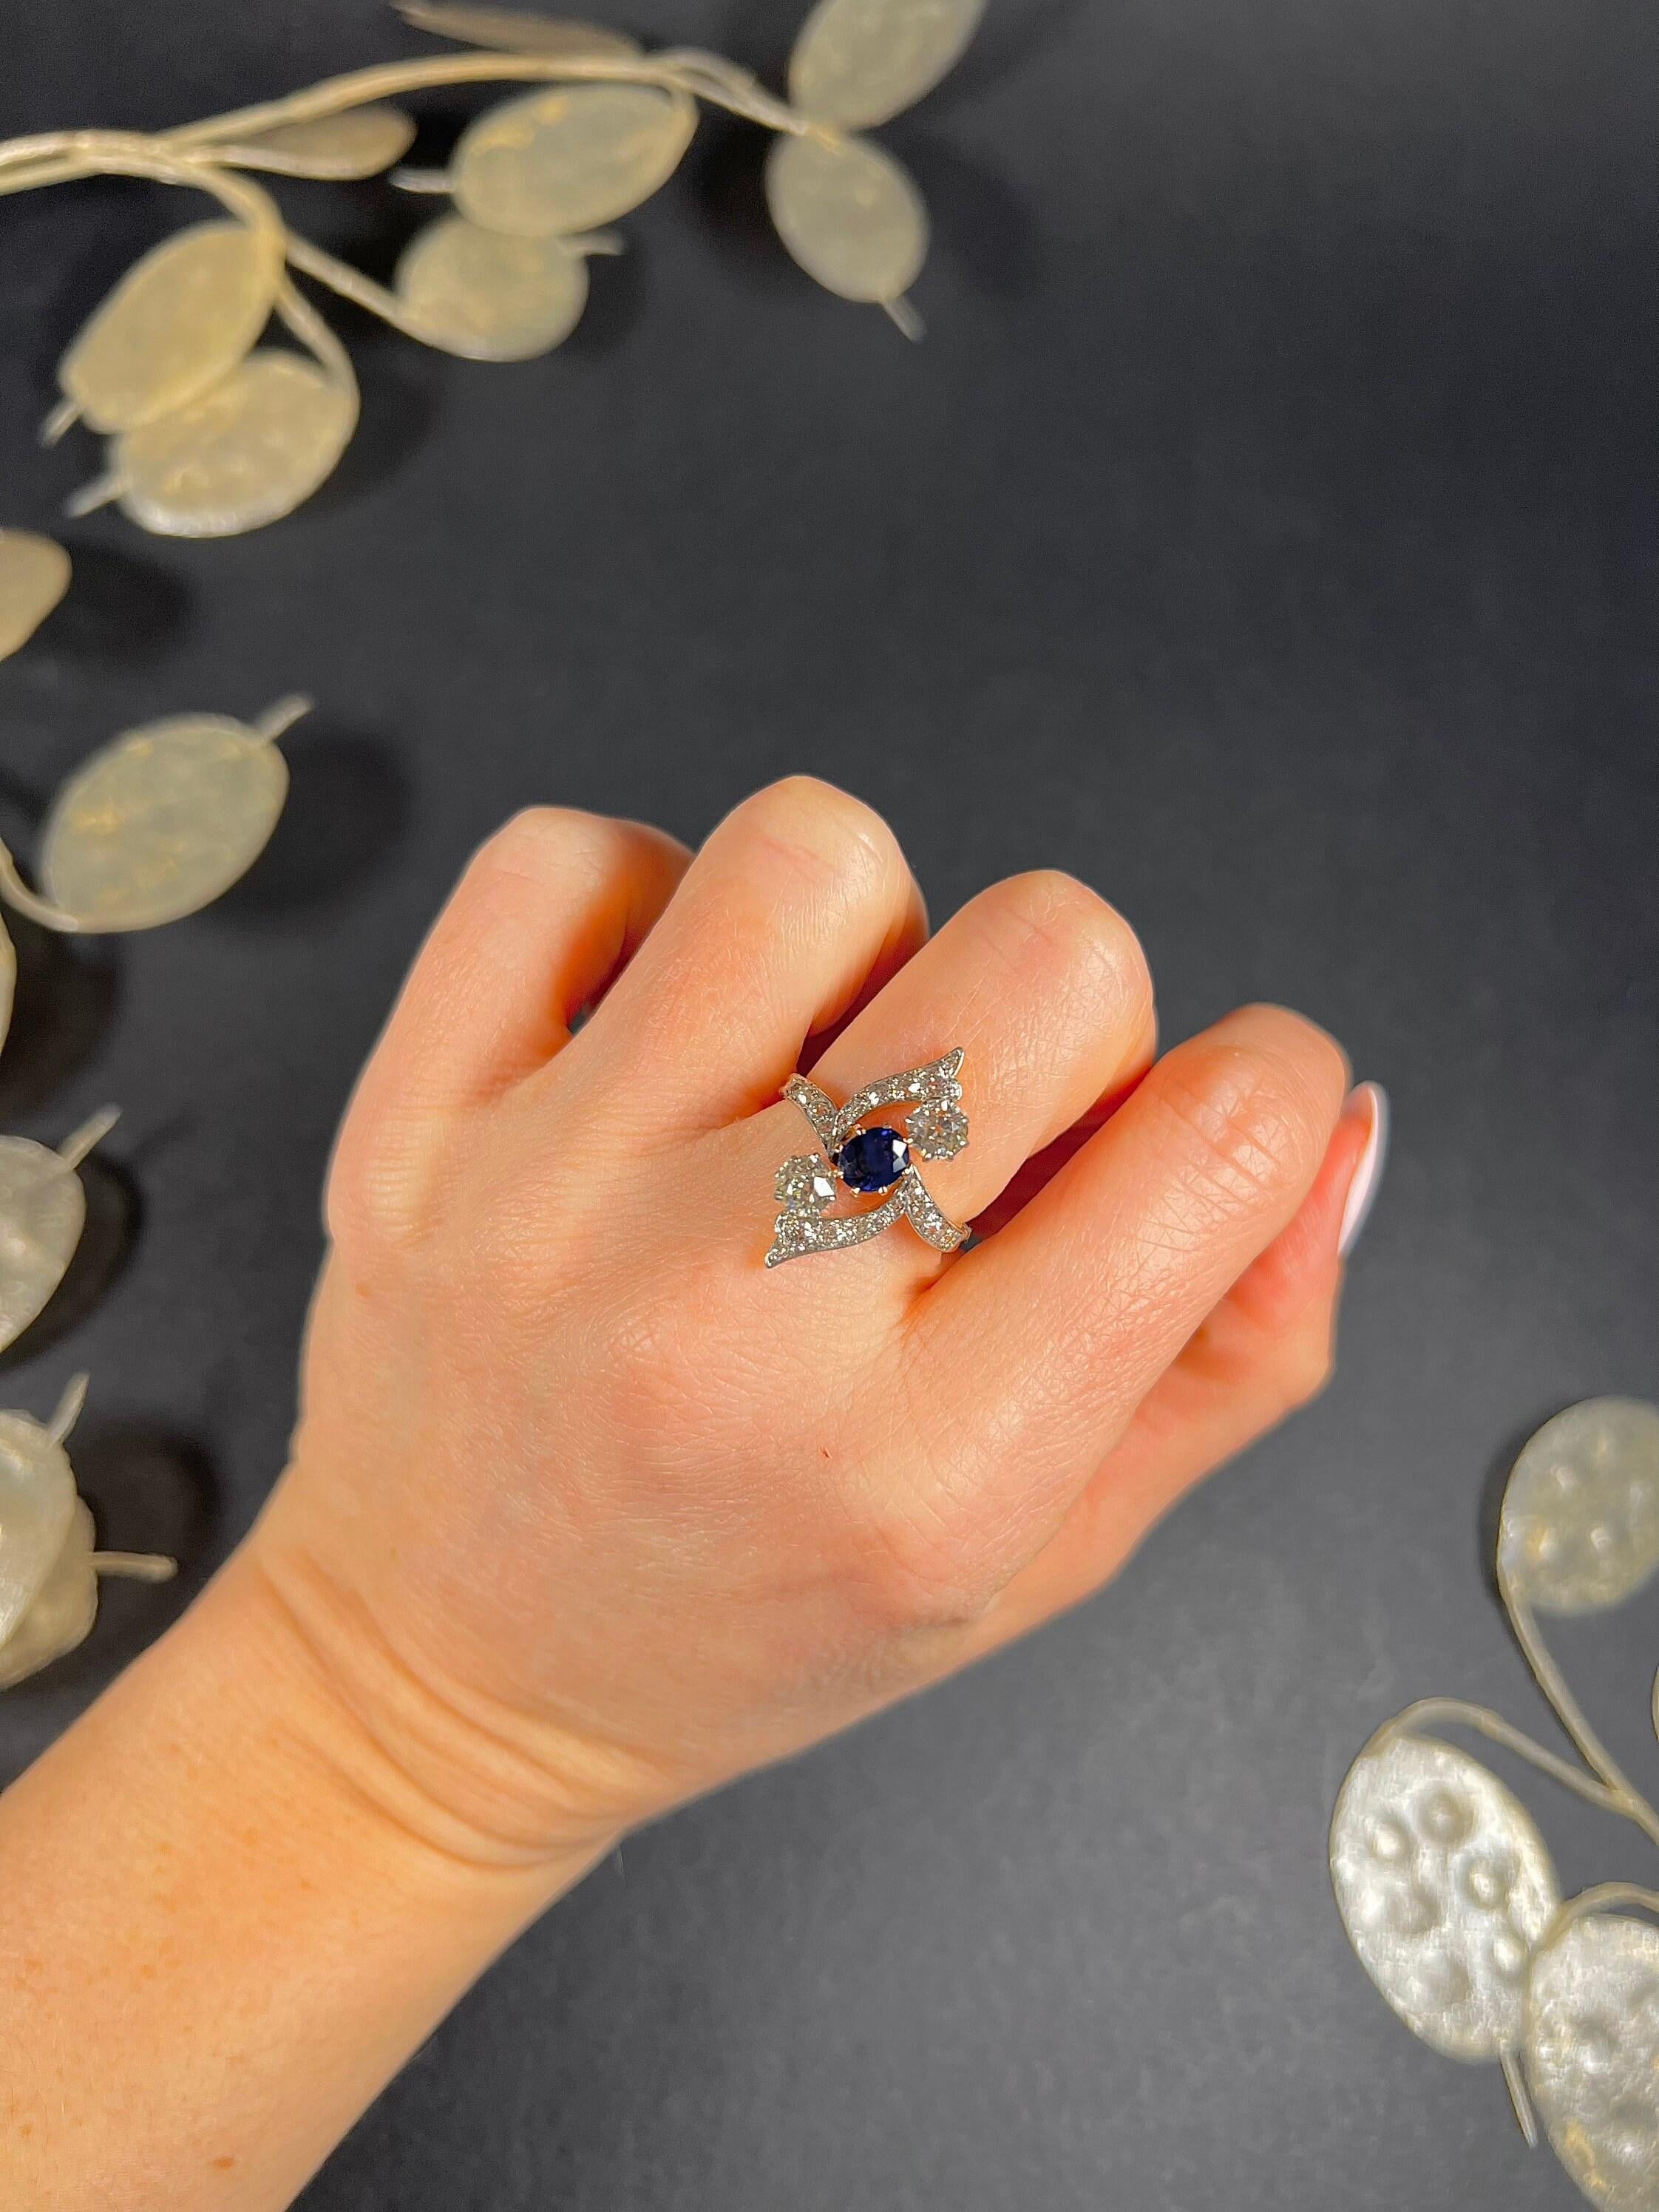 Antique Marquise Ring

18ct Gold Stamped

Circa 1880

Fabulous, Victorian marquise shaped ring. Set with a centre, oval, faceted, natural sapphire & two natural, round diamonds. The beautiful crossover setting is full of sparkling natural diamonds